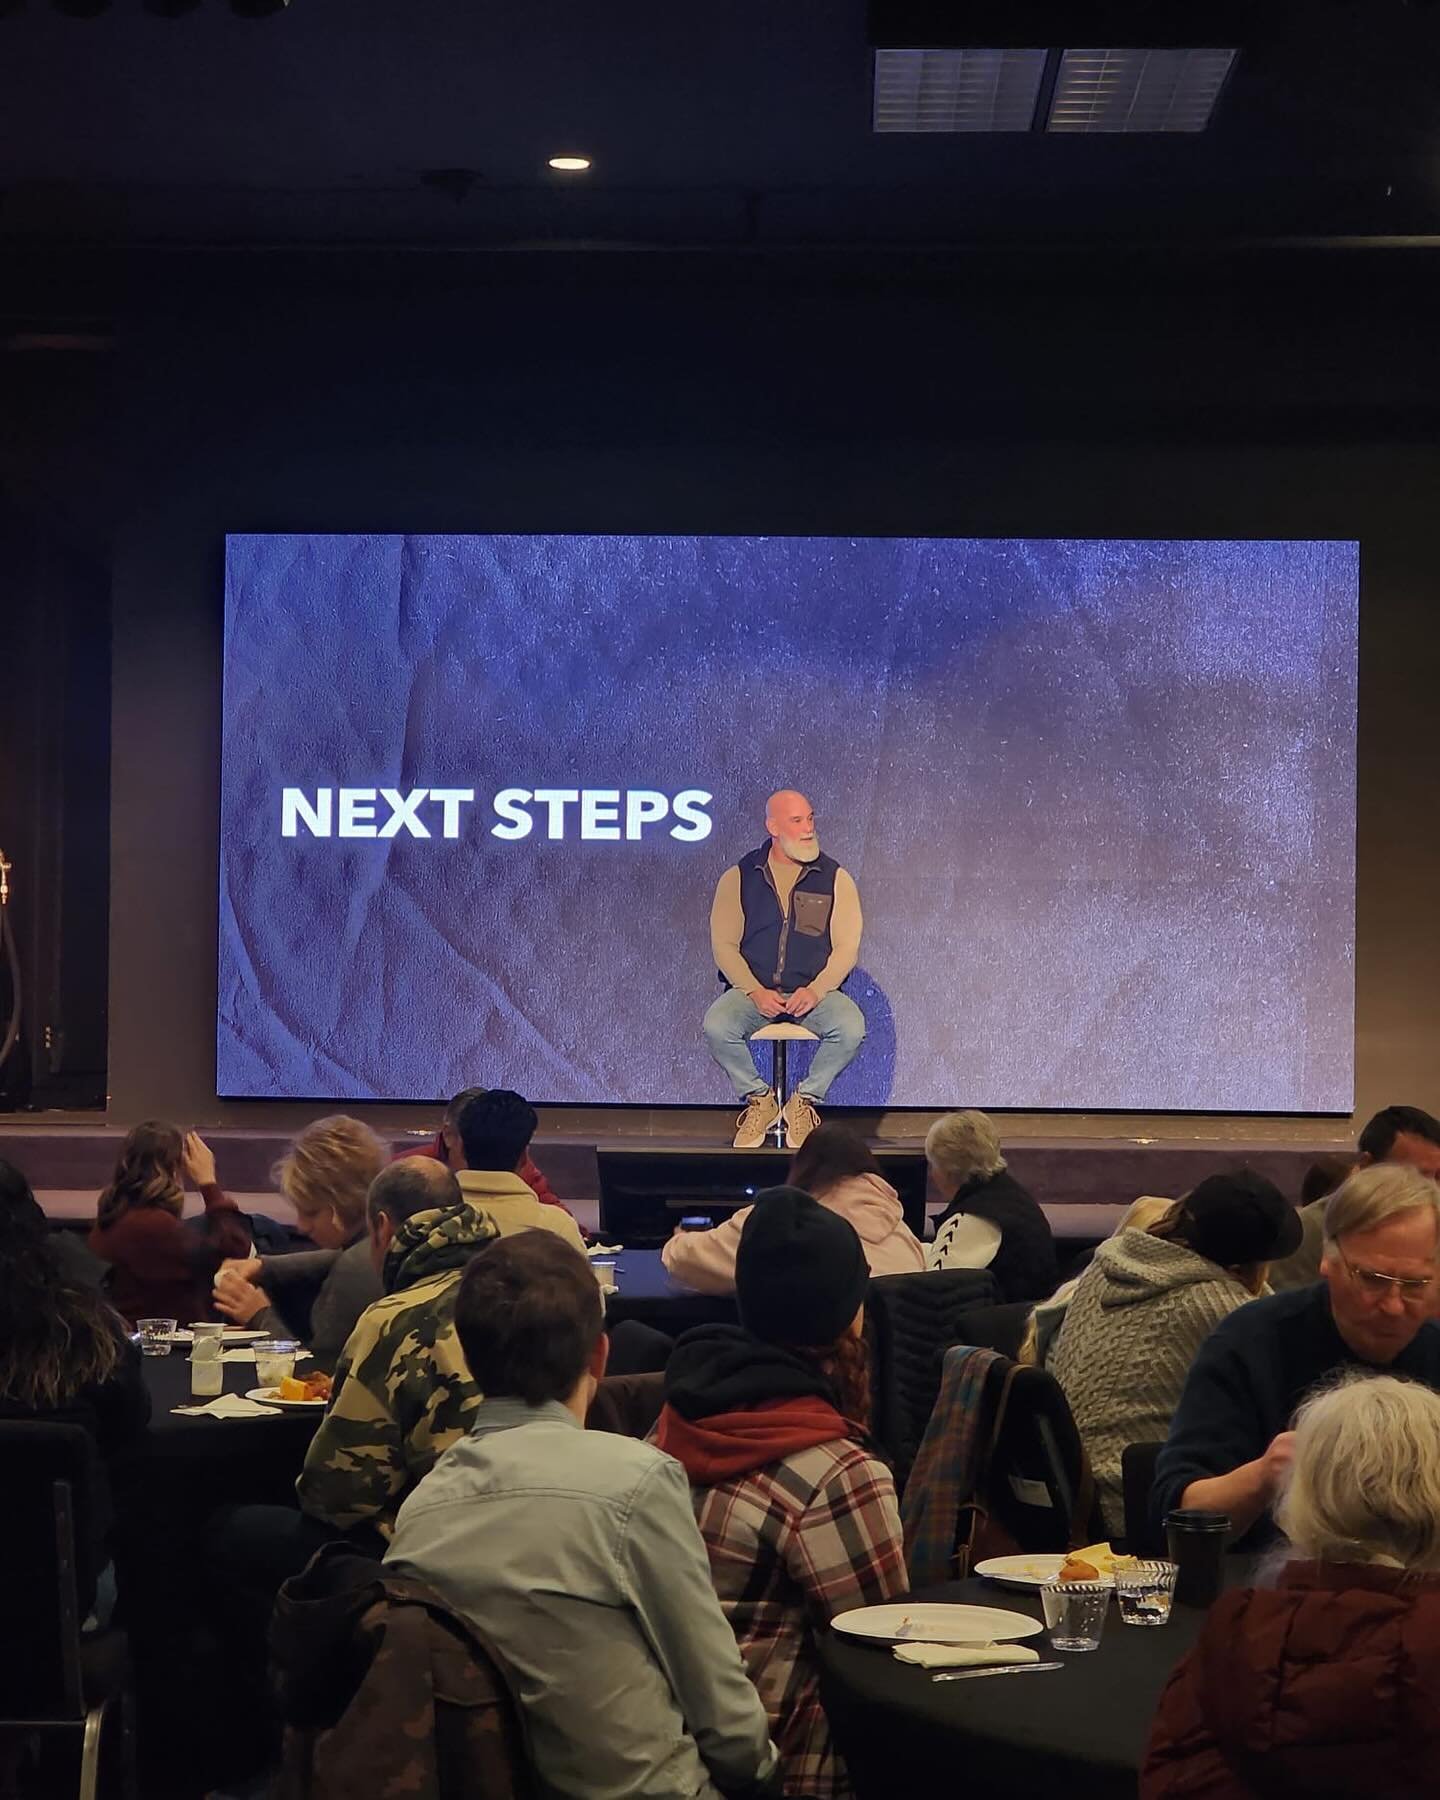 We are combining all 3 Next Step classes into 1 packed Saturday morning brunch! Join us to hear about why Ken and Patti started Radius Church, why we do church the way we do, and how you can get involved! May 4th 9am-12